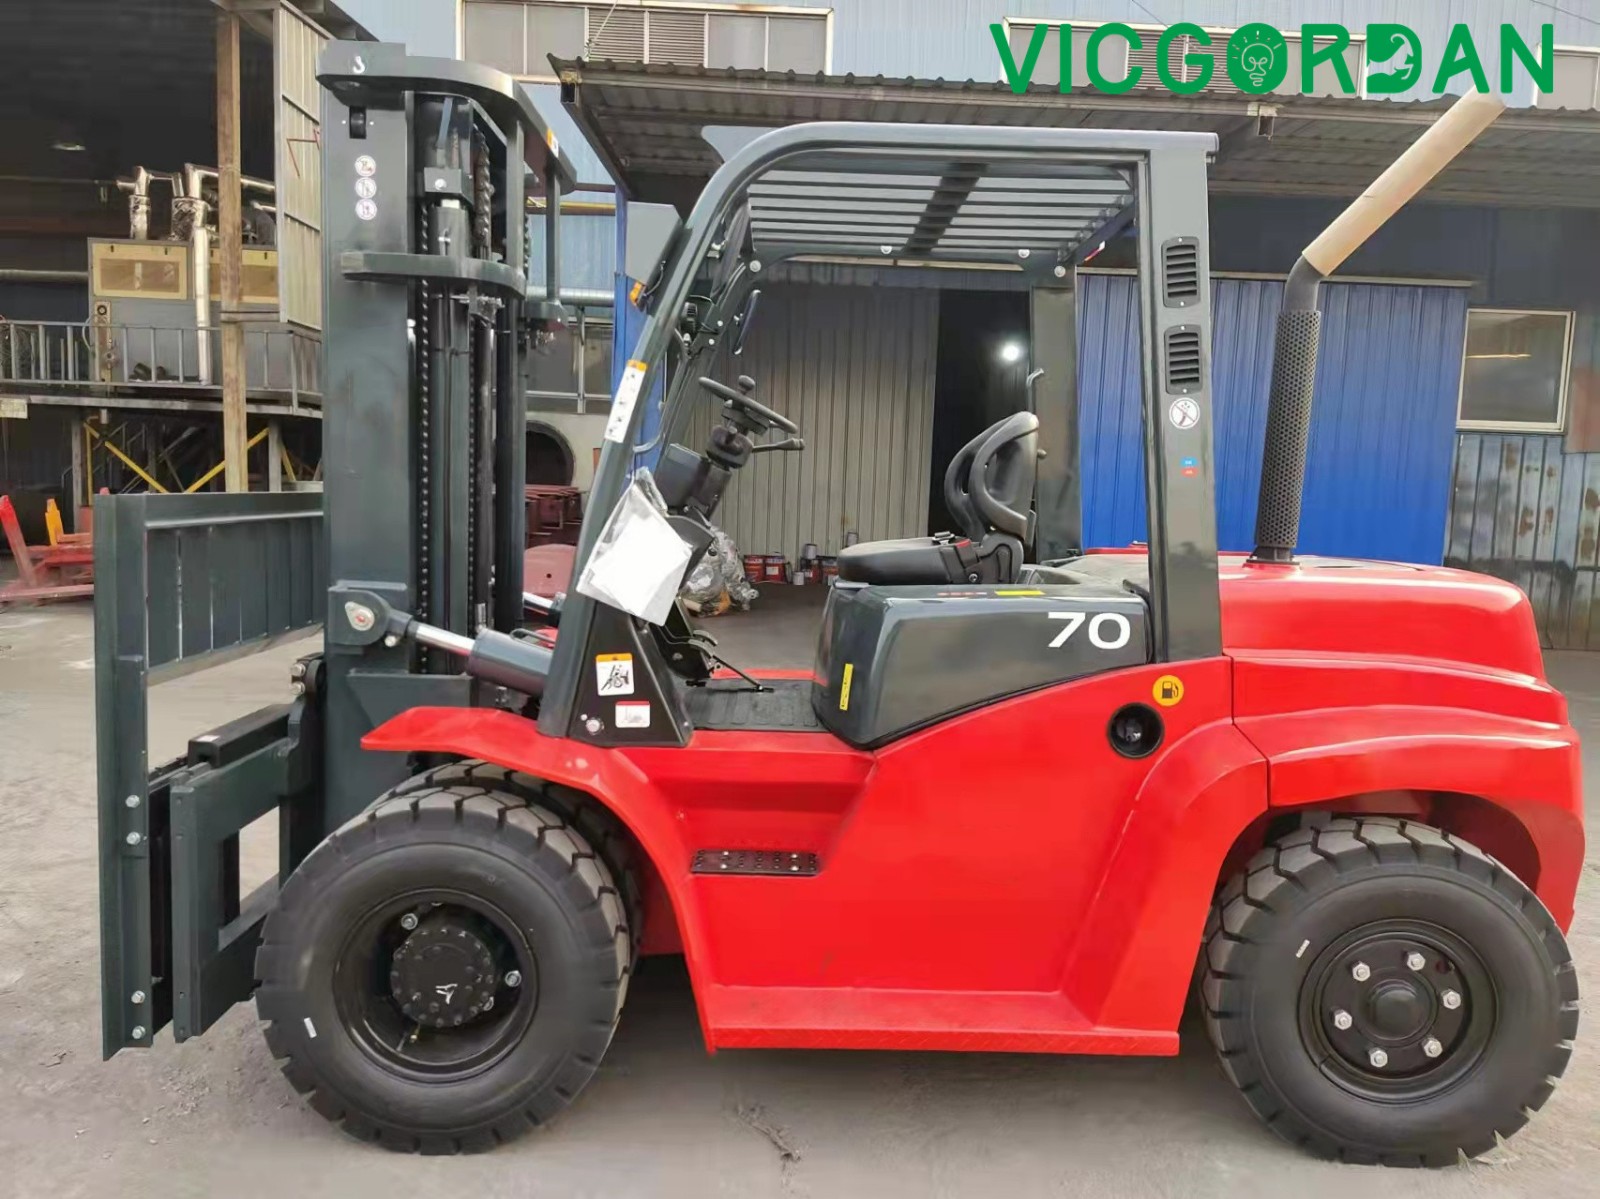 Vicgordan 7 ton diesel forklift is going to Ivory coast